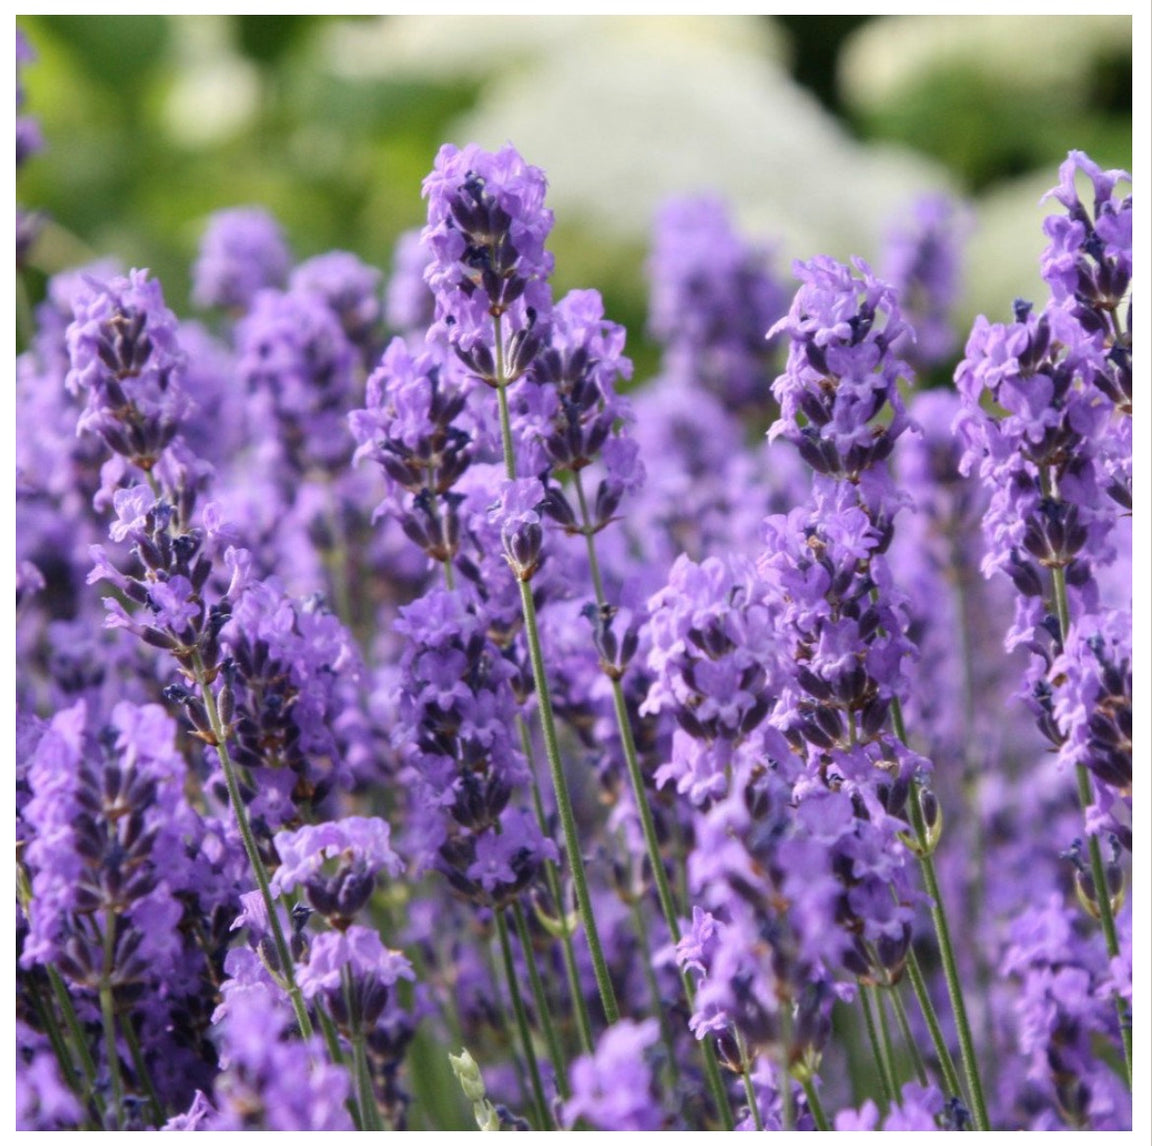 Essential Oils | The Essential Oil Company - Pure and Aromatic Oils